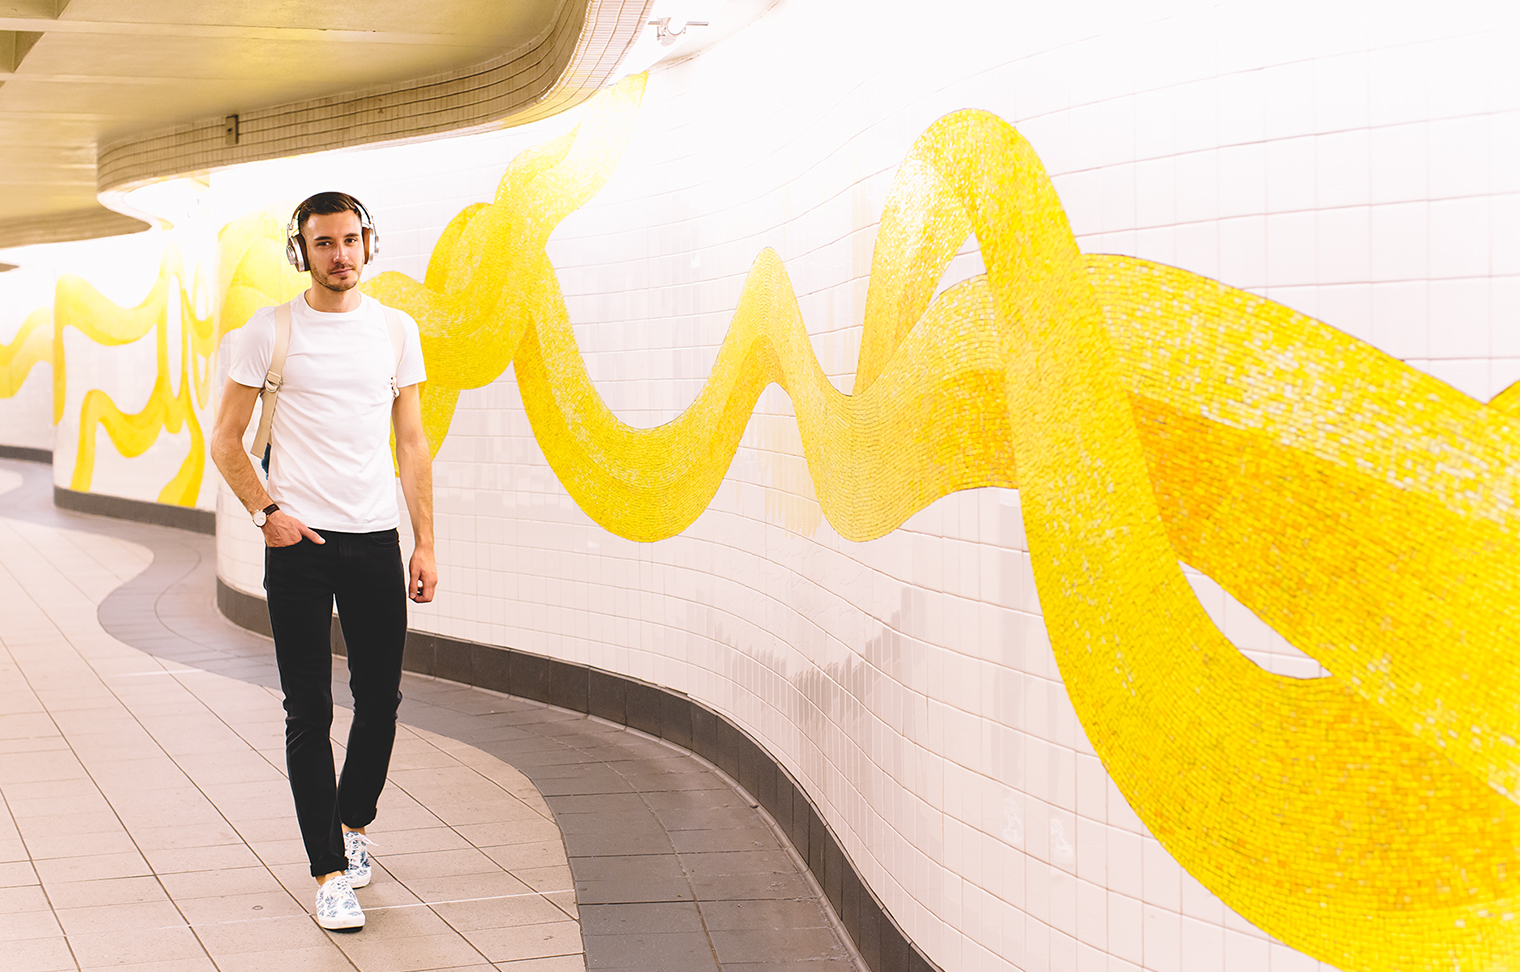 Audible-Done-While-Listening-Colorful-Subway-Stations-2